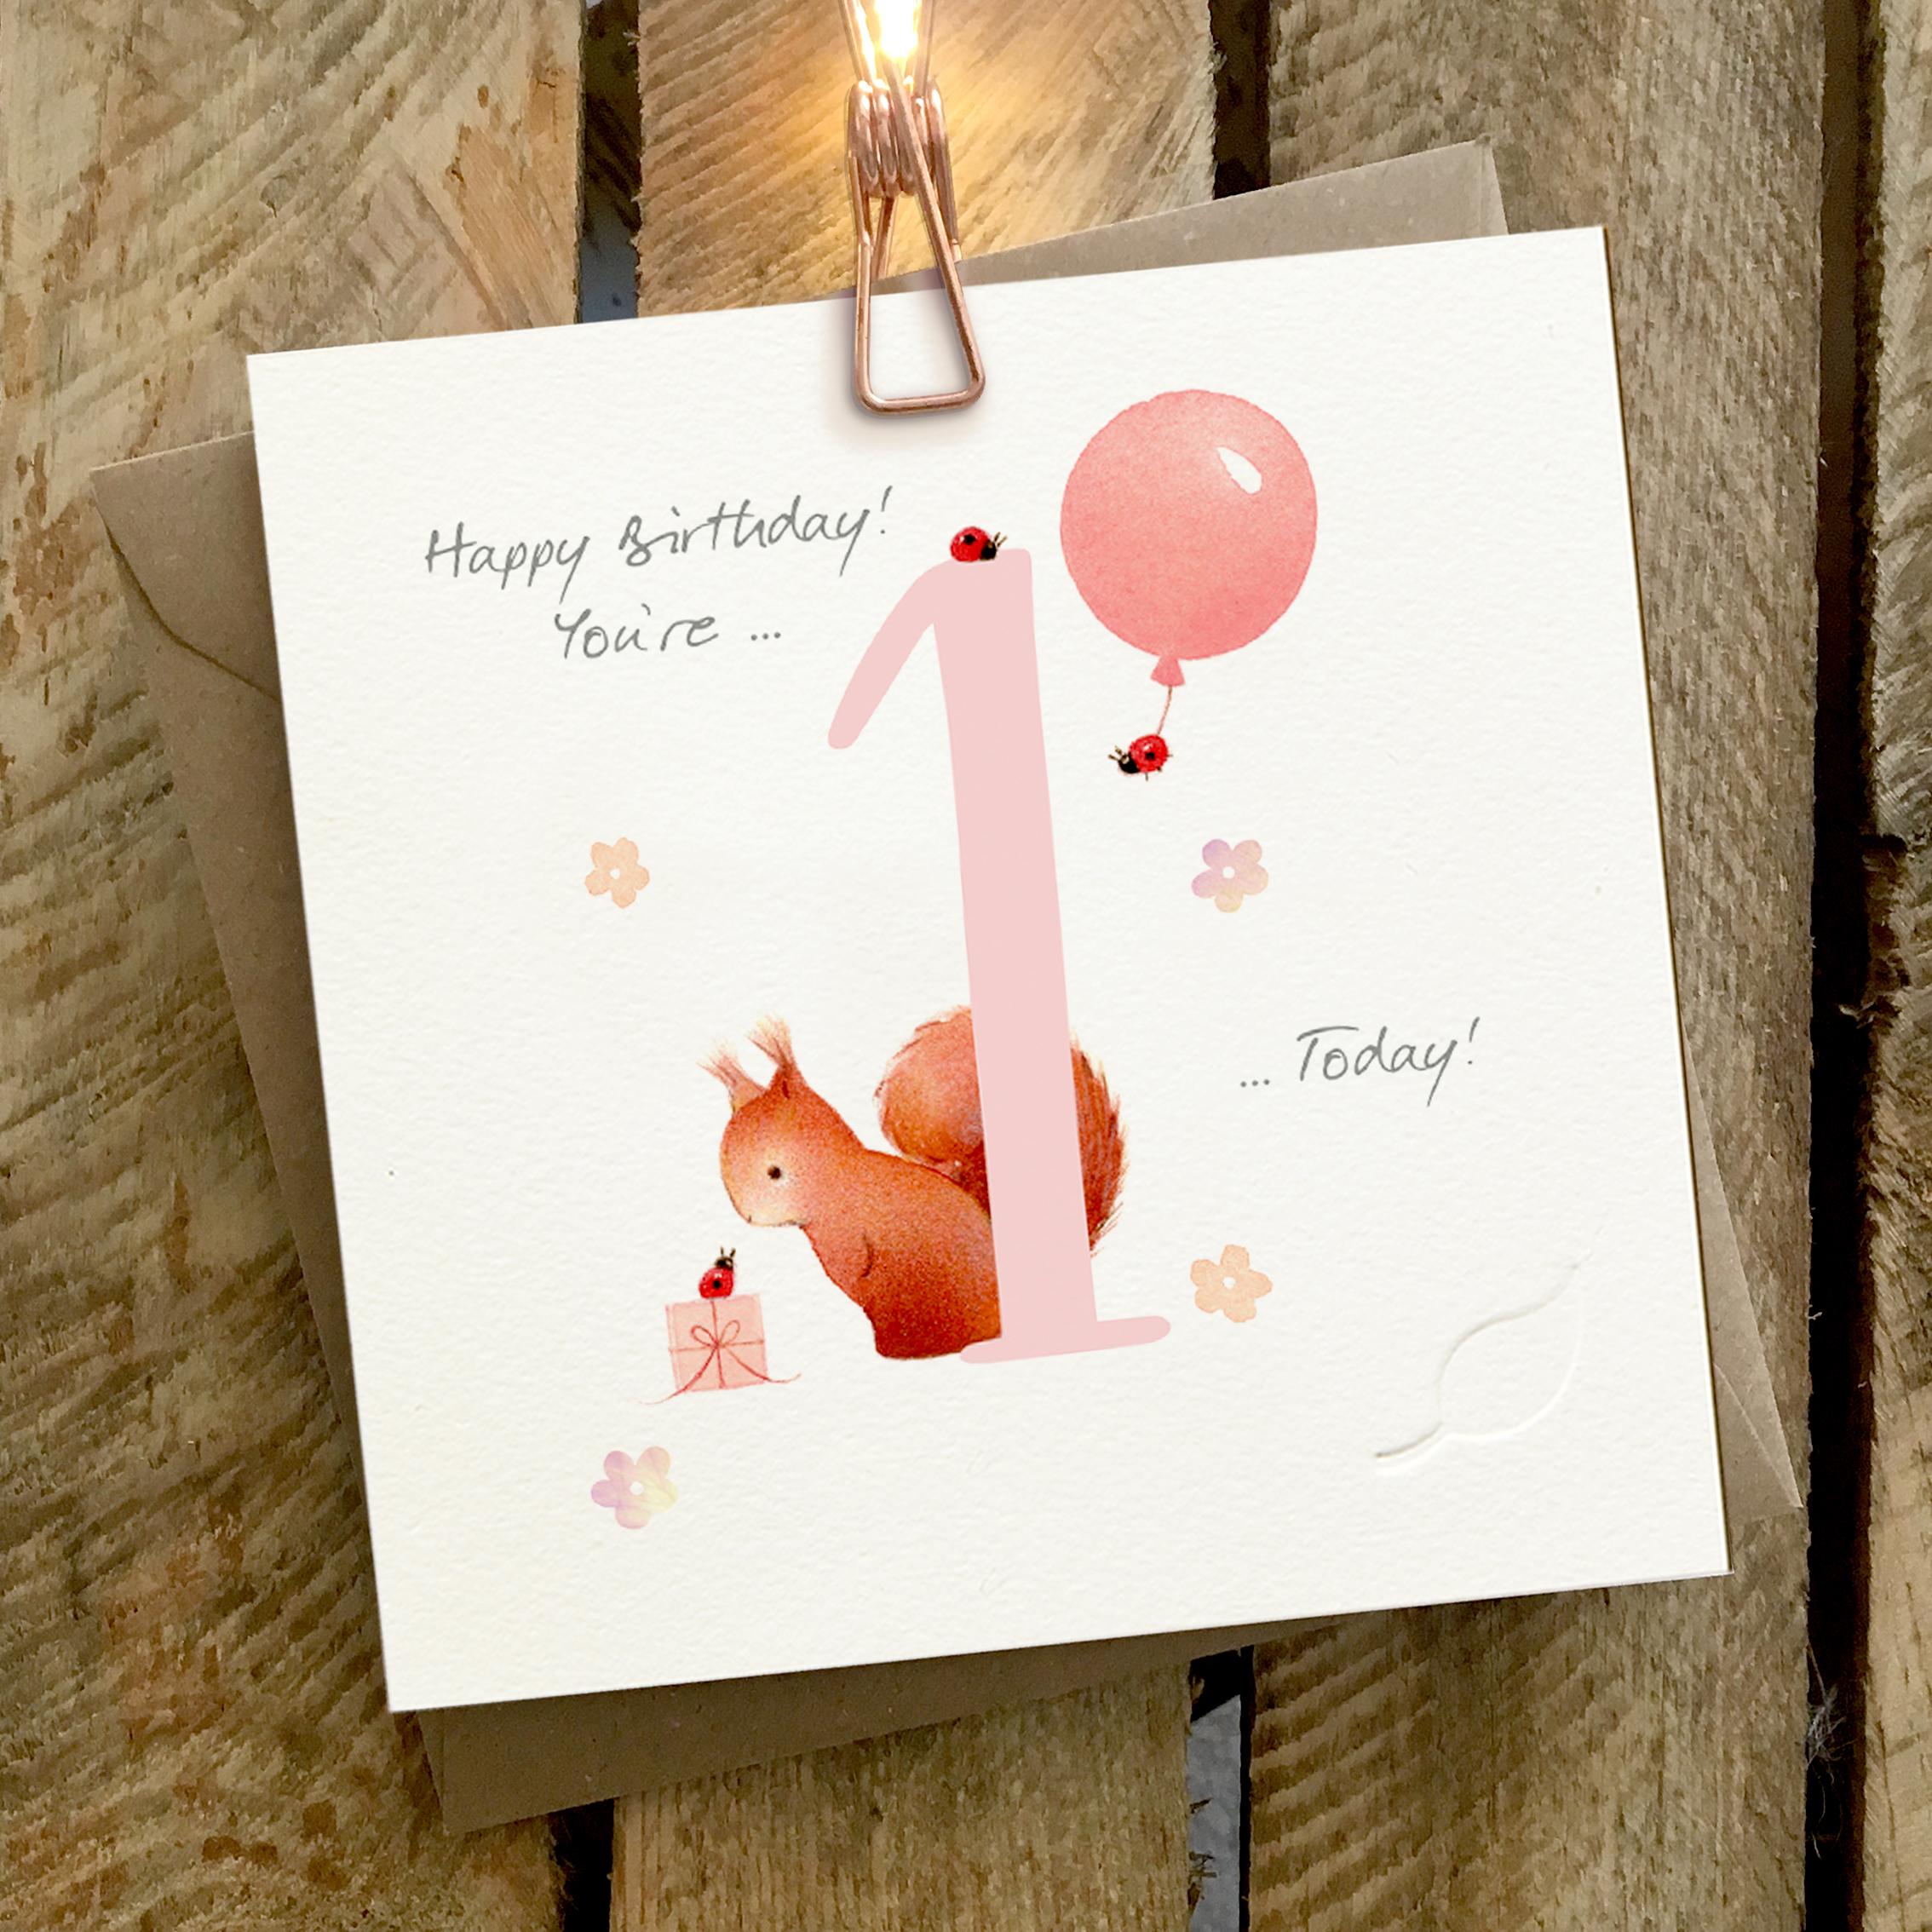 Card featuring a squirrel and a ladybird with a large pink number 1